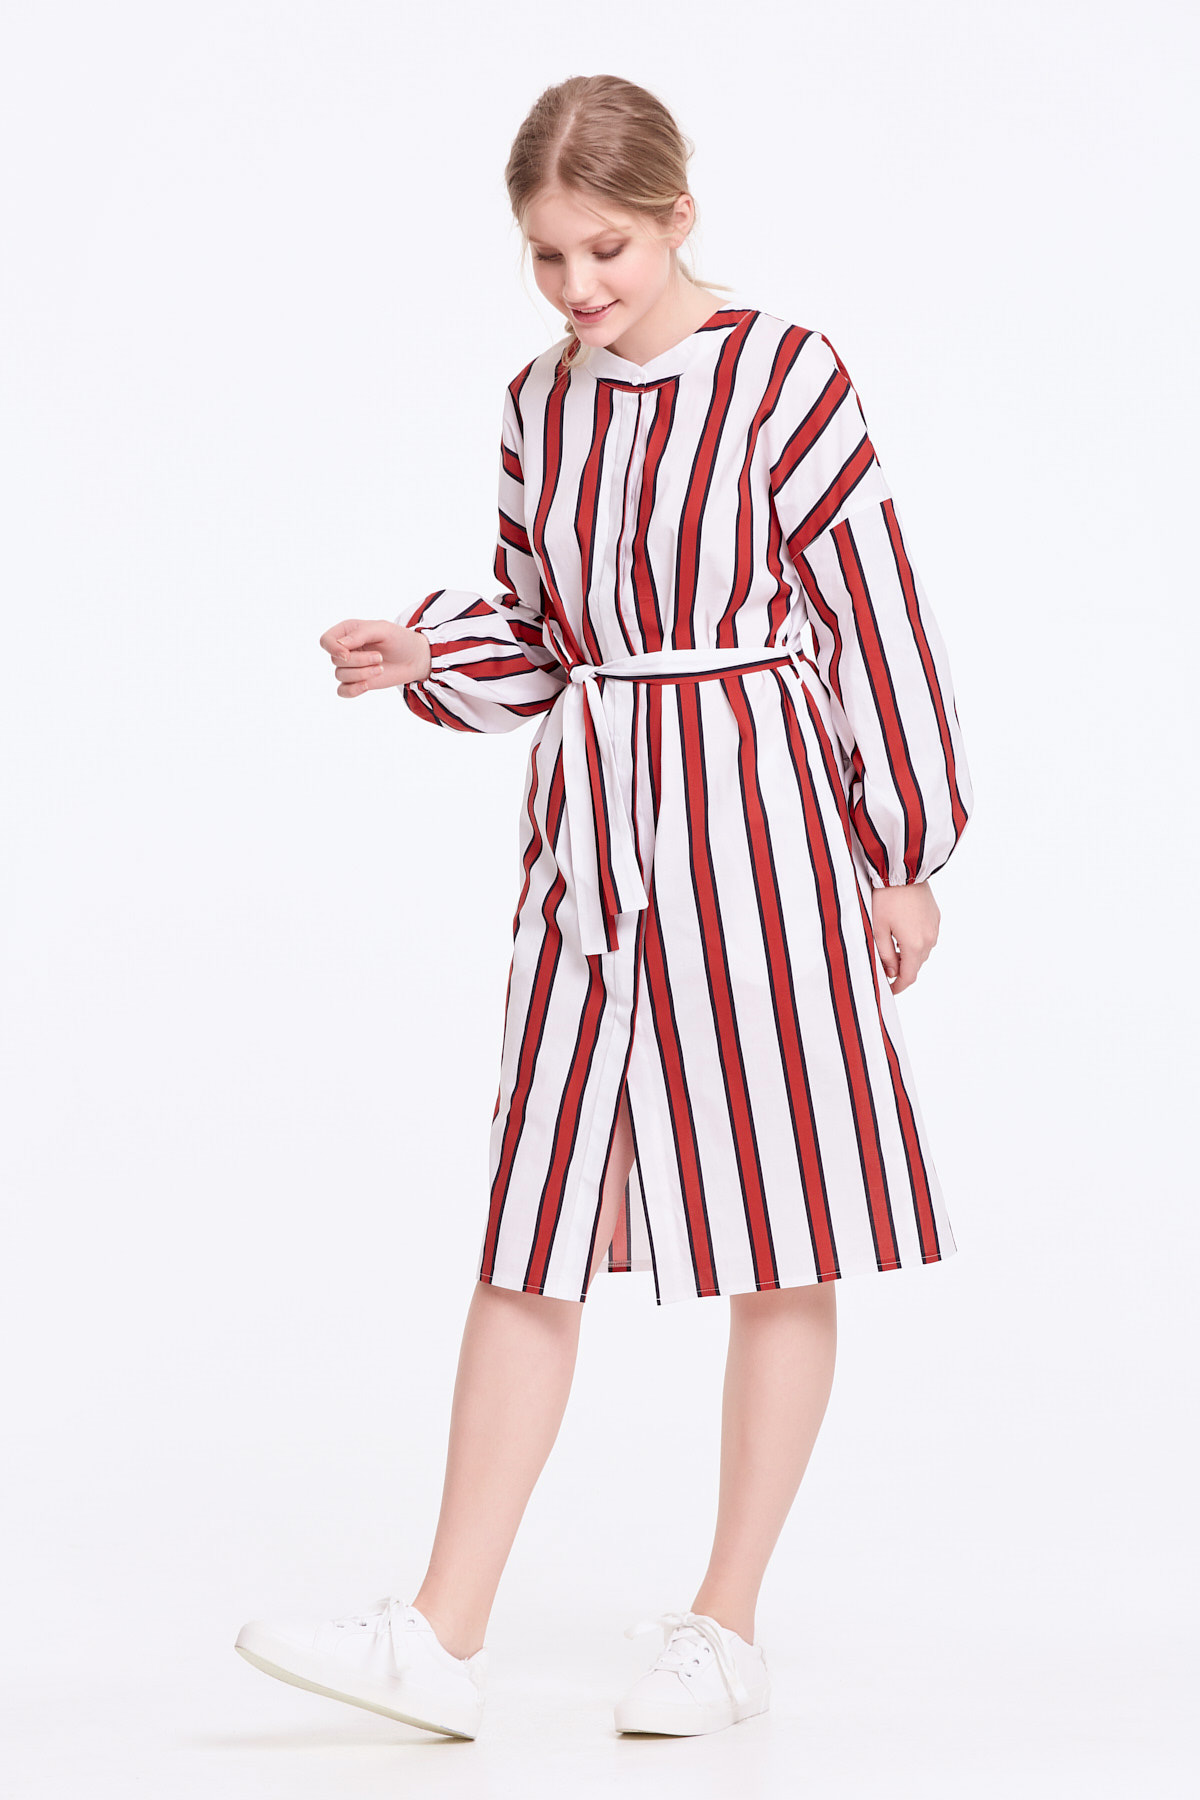 White dress with red and black stripes, photo 5